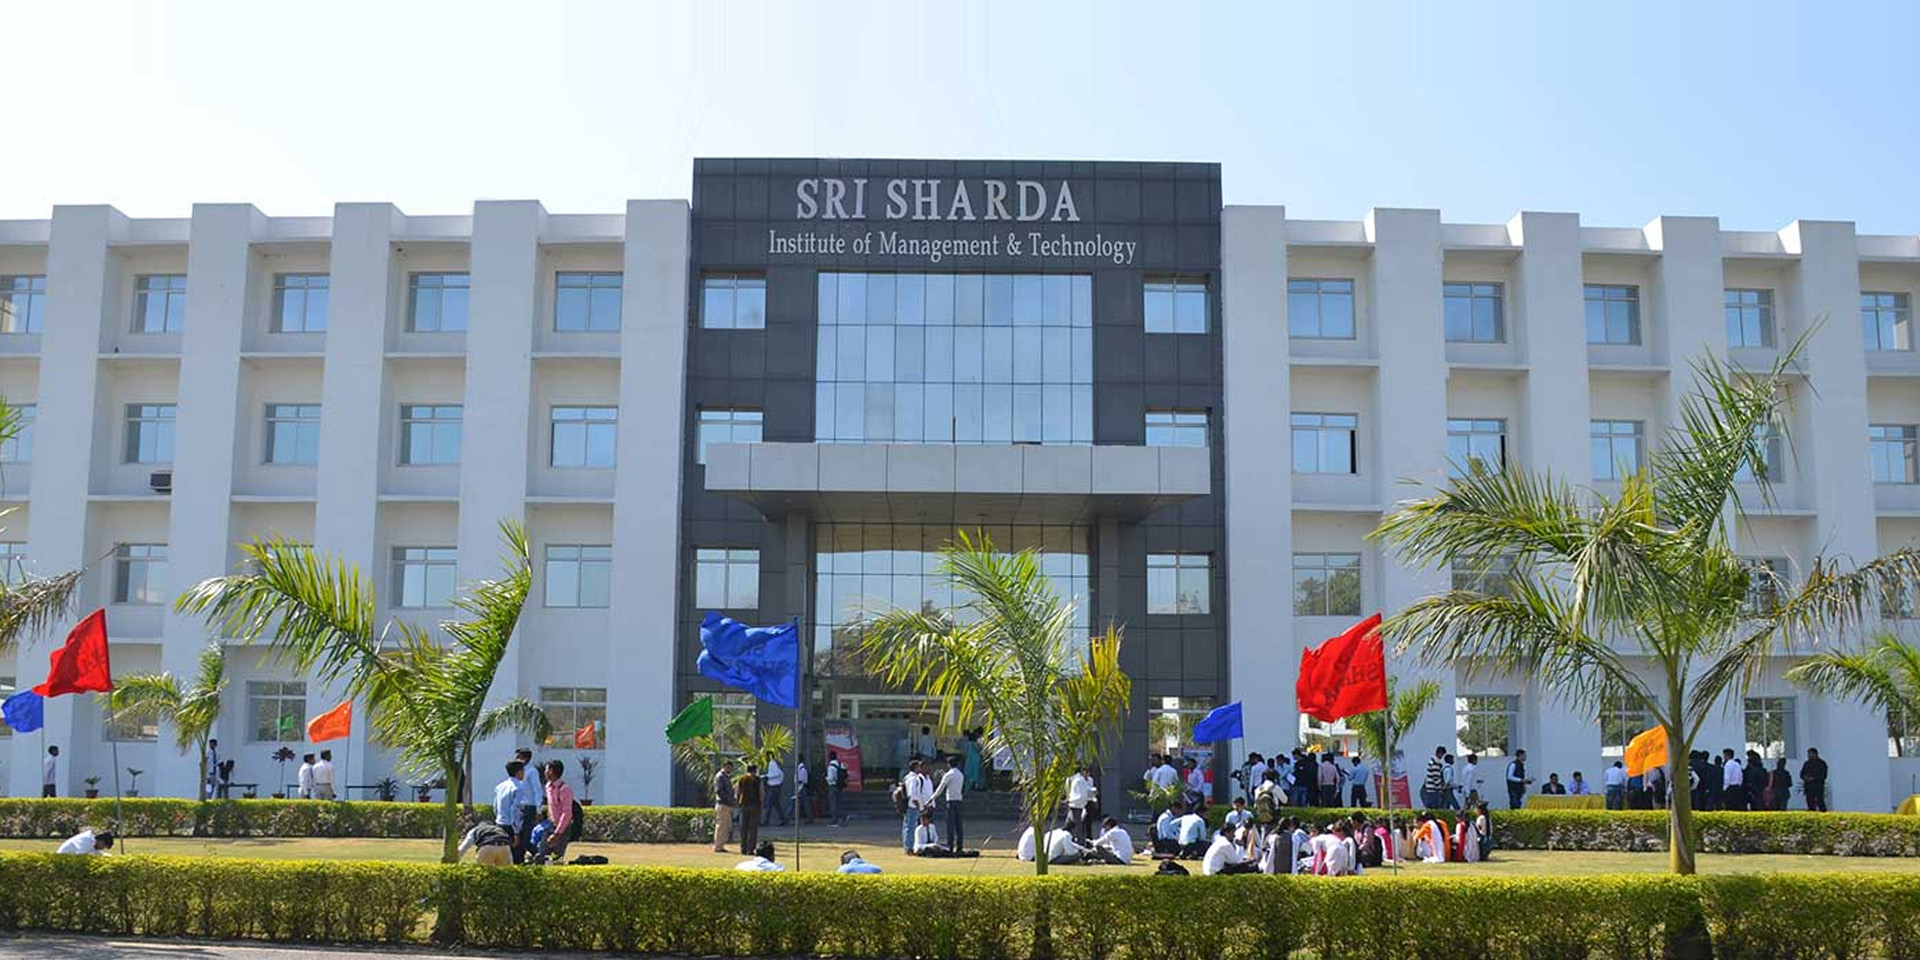 Mass communication Colleges in Lucknow | Bba Colleges in Lucknow | Top bca Colleges in Lucknow, Sri Sharda Group Of Institutions